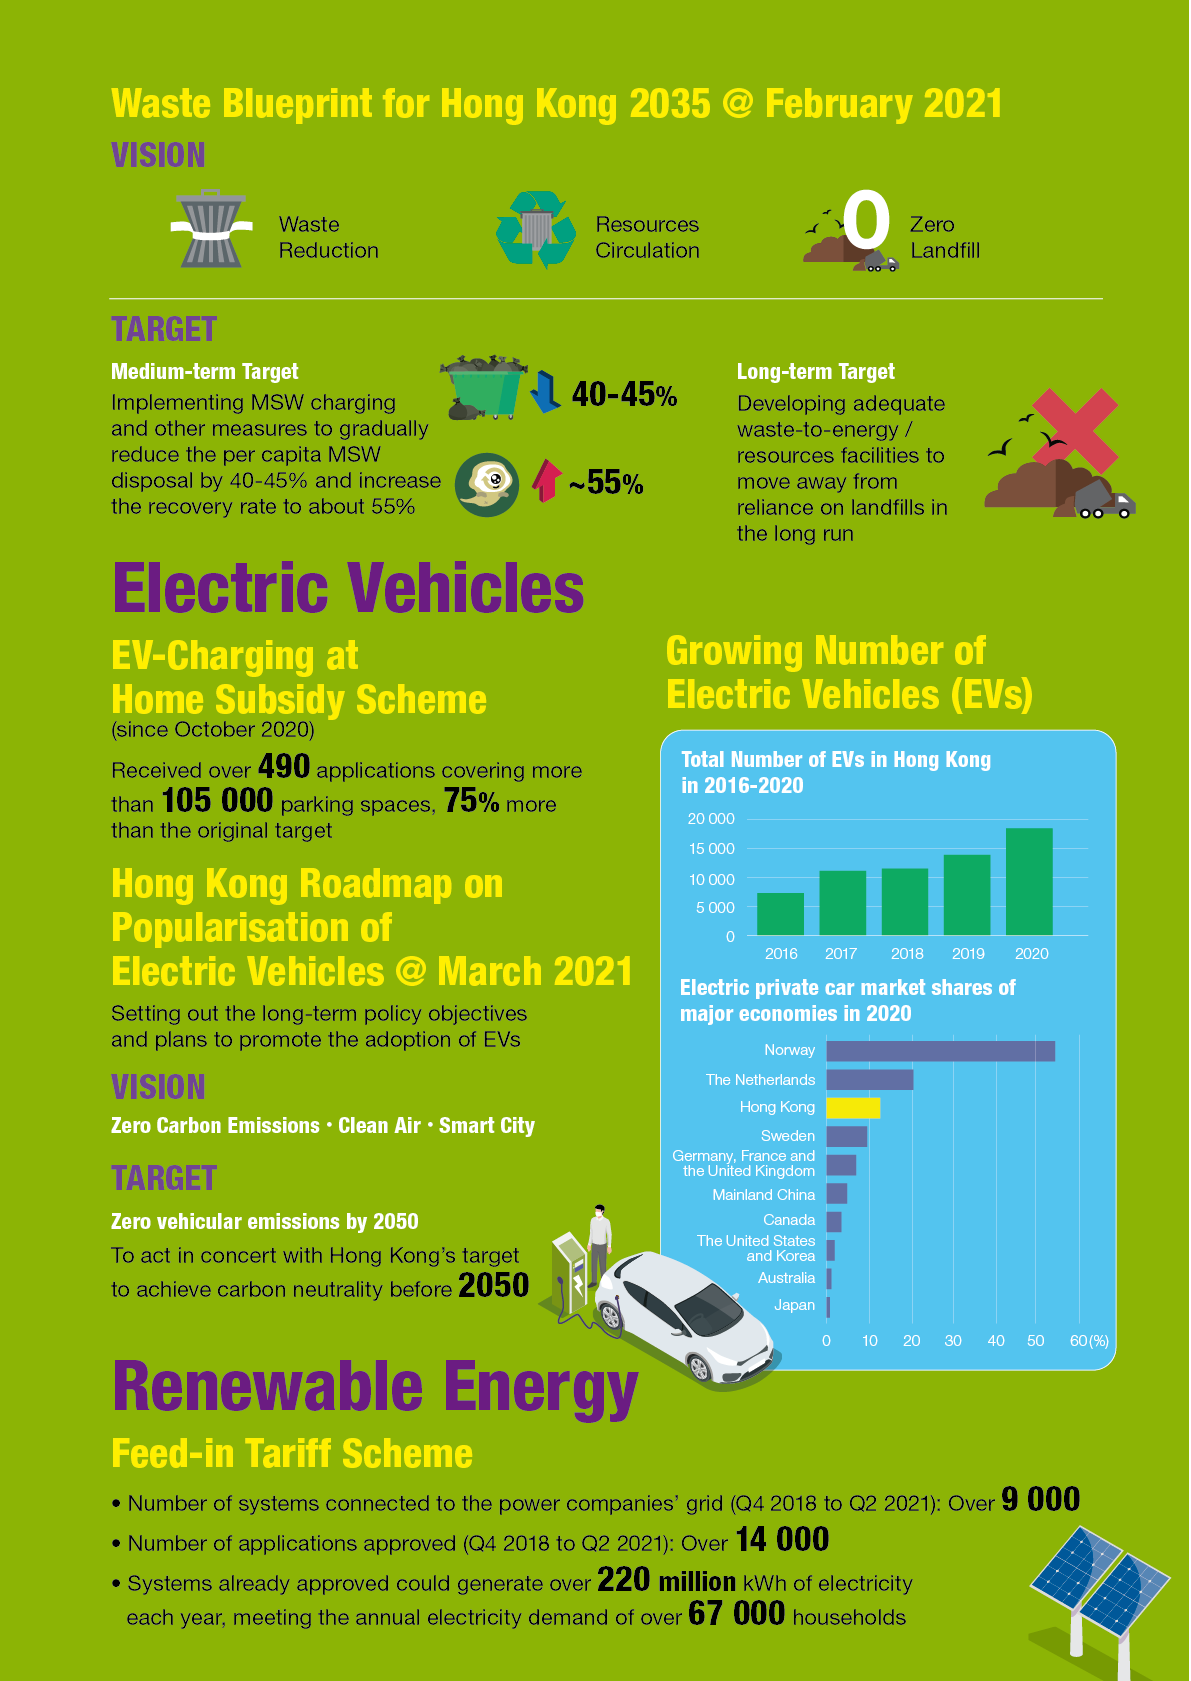 Electric Vehicles and Renewable Energy